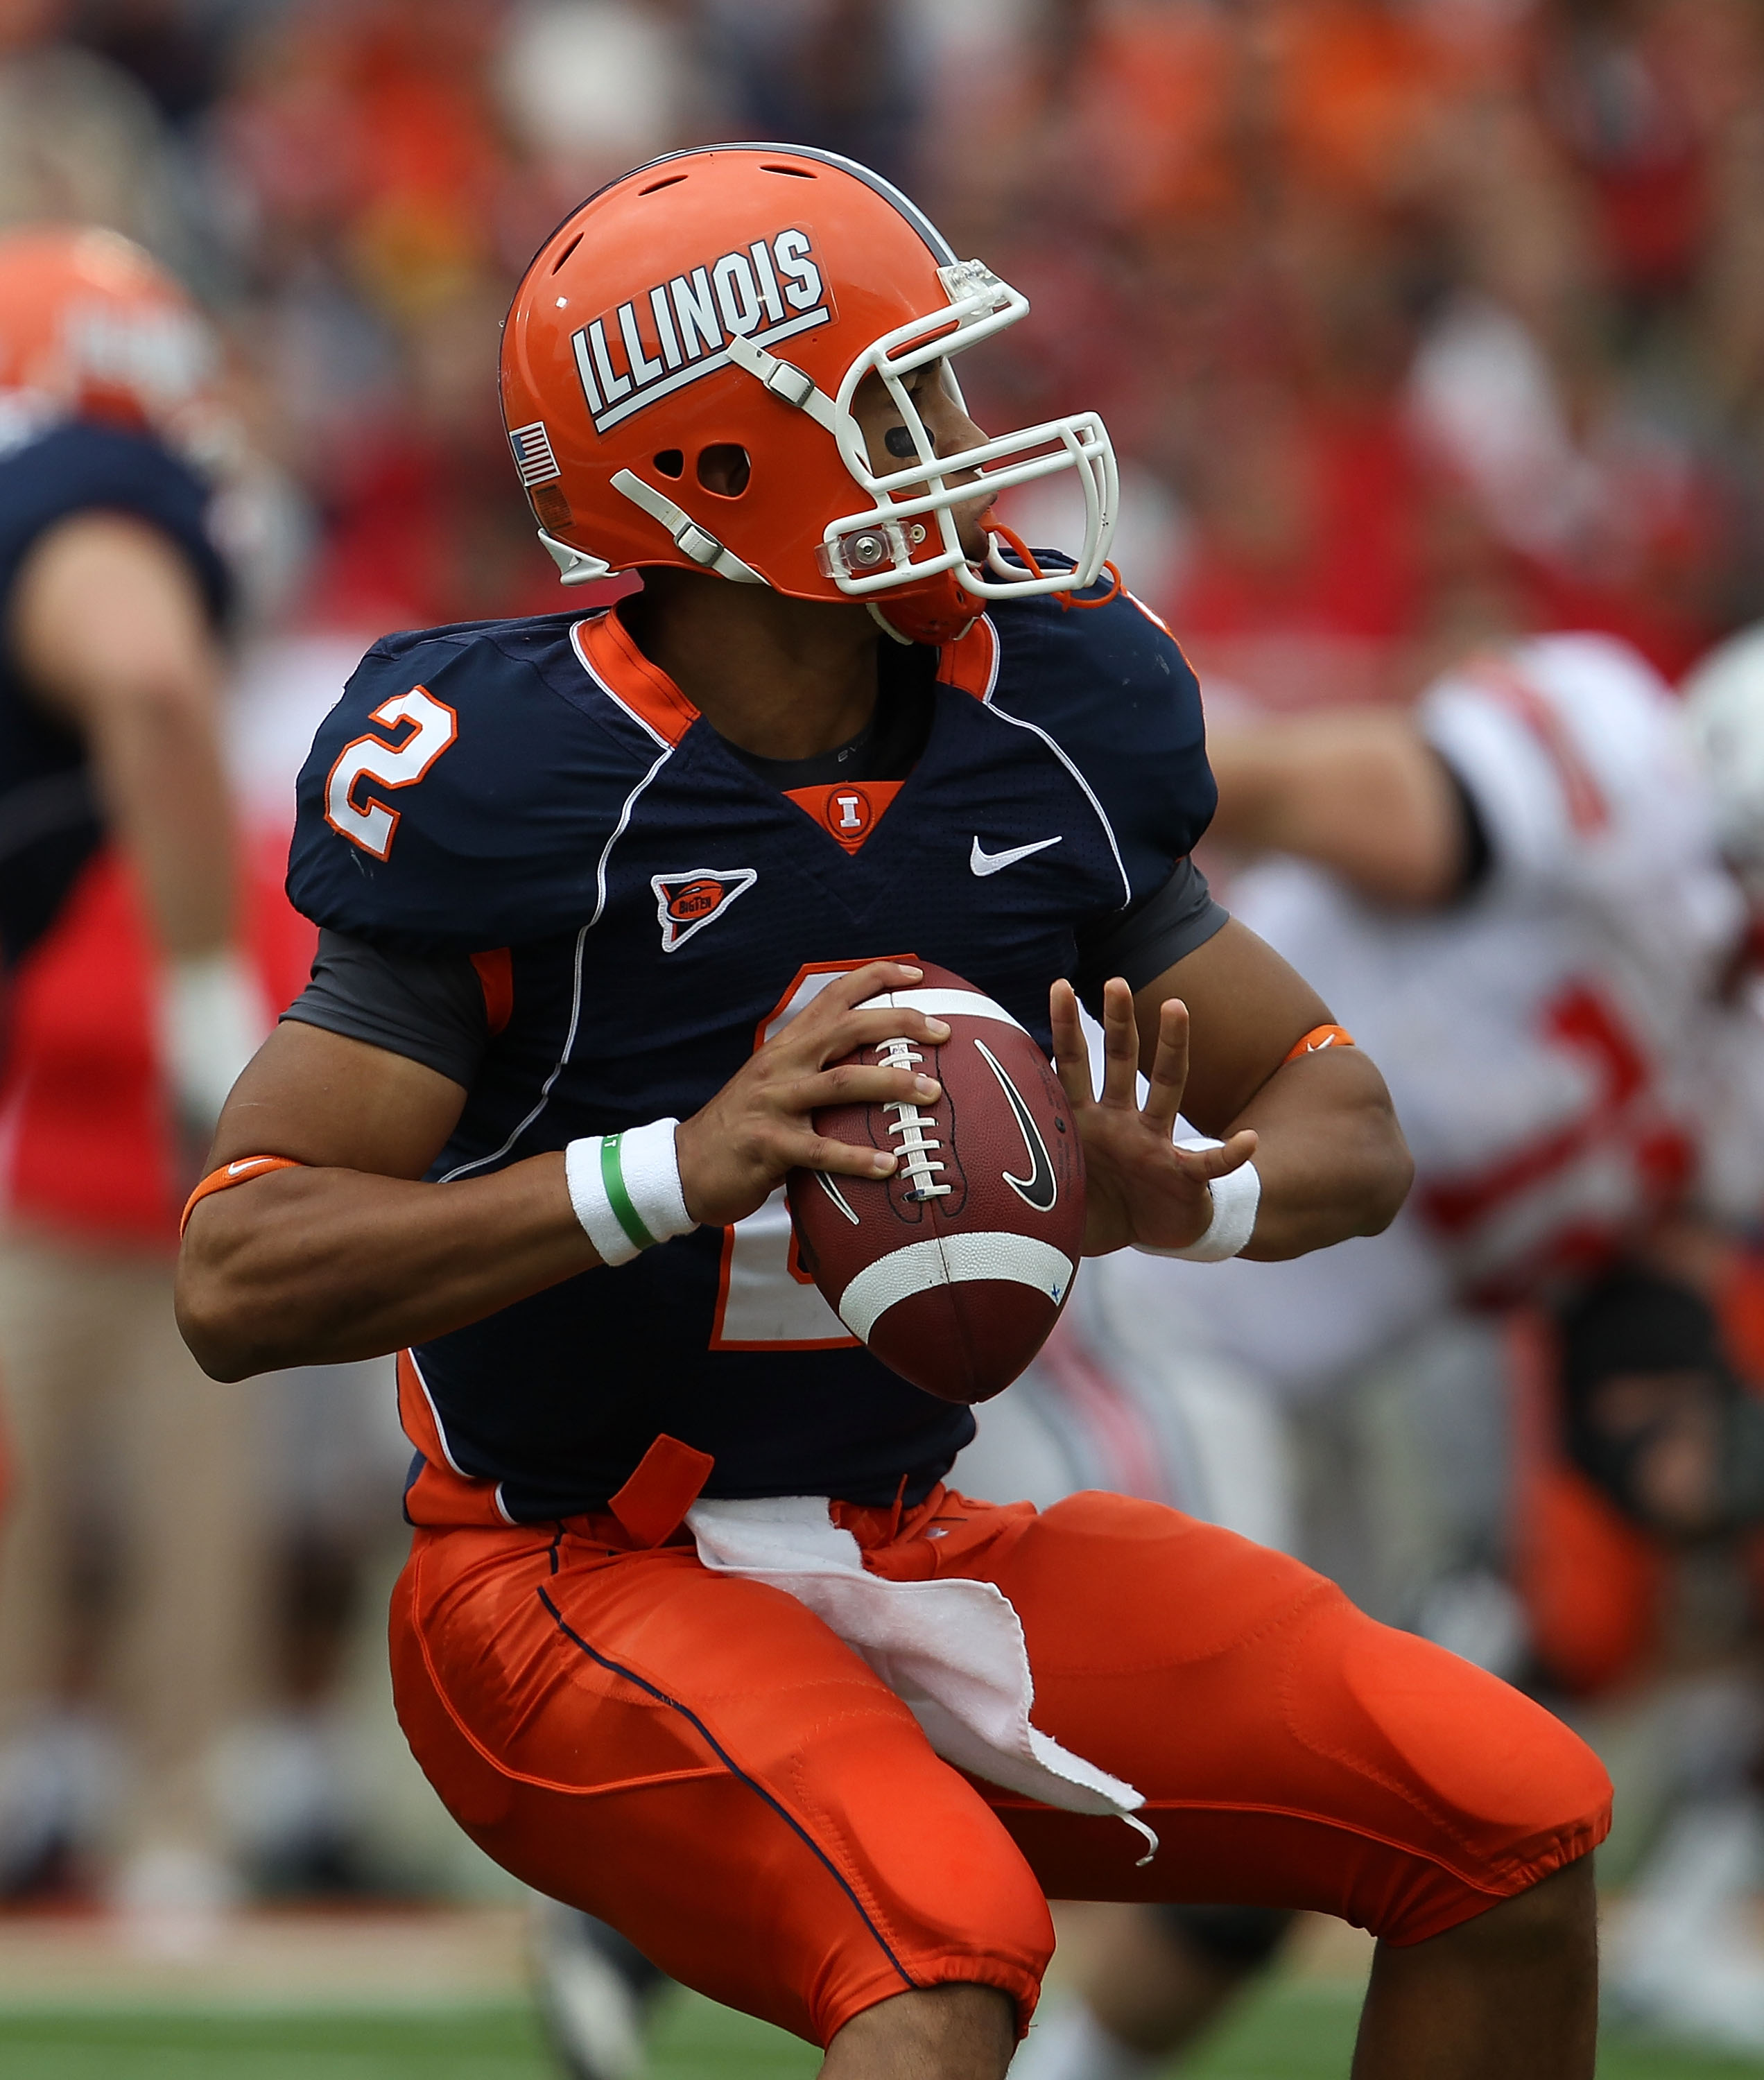 CHAMPAIGN, IL - OCTOBER 02: Nathan Scheelhaase #2 of the Illinois Fighting Illini looks for a receiver against the Ohio State Buckeyes at Memorial Stadium on October 2, 2010 in Champaign, Illinois. Ohio State defeated Illinois 24-13. (Photo by Jonathan Da